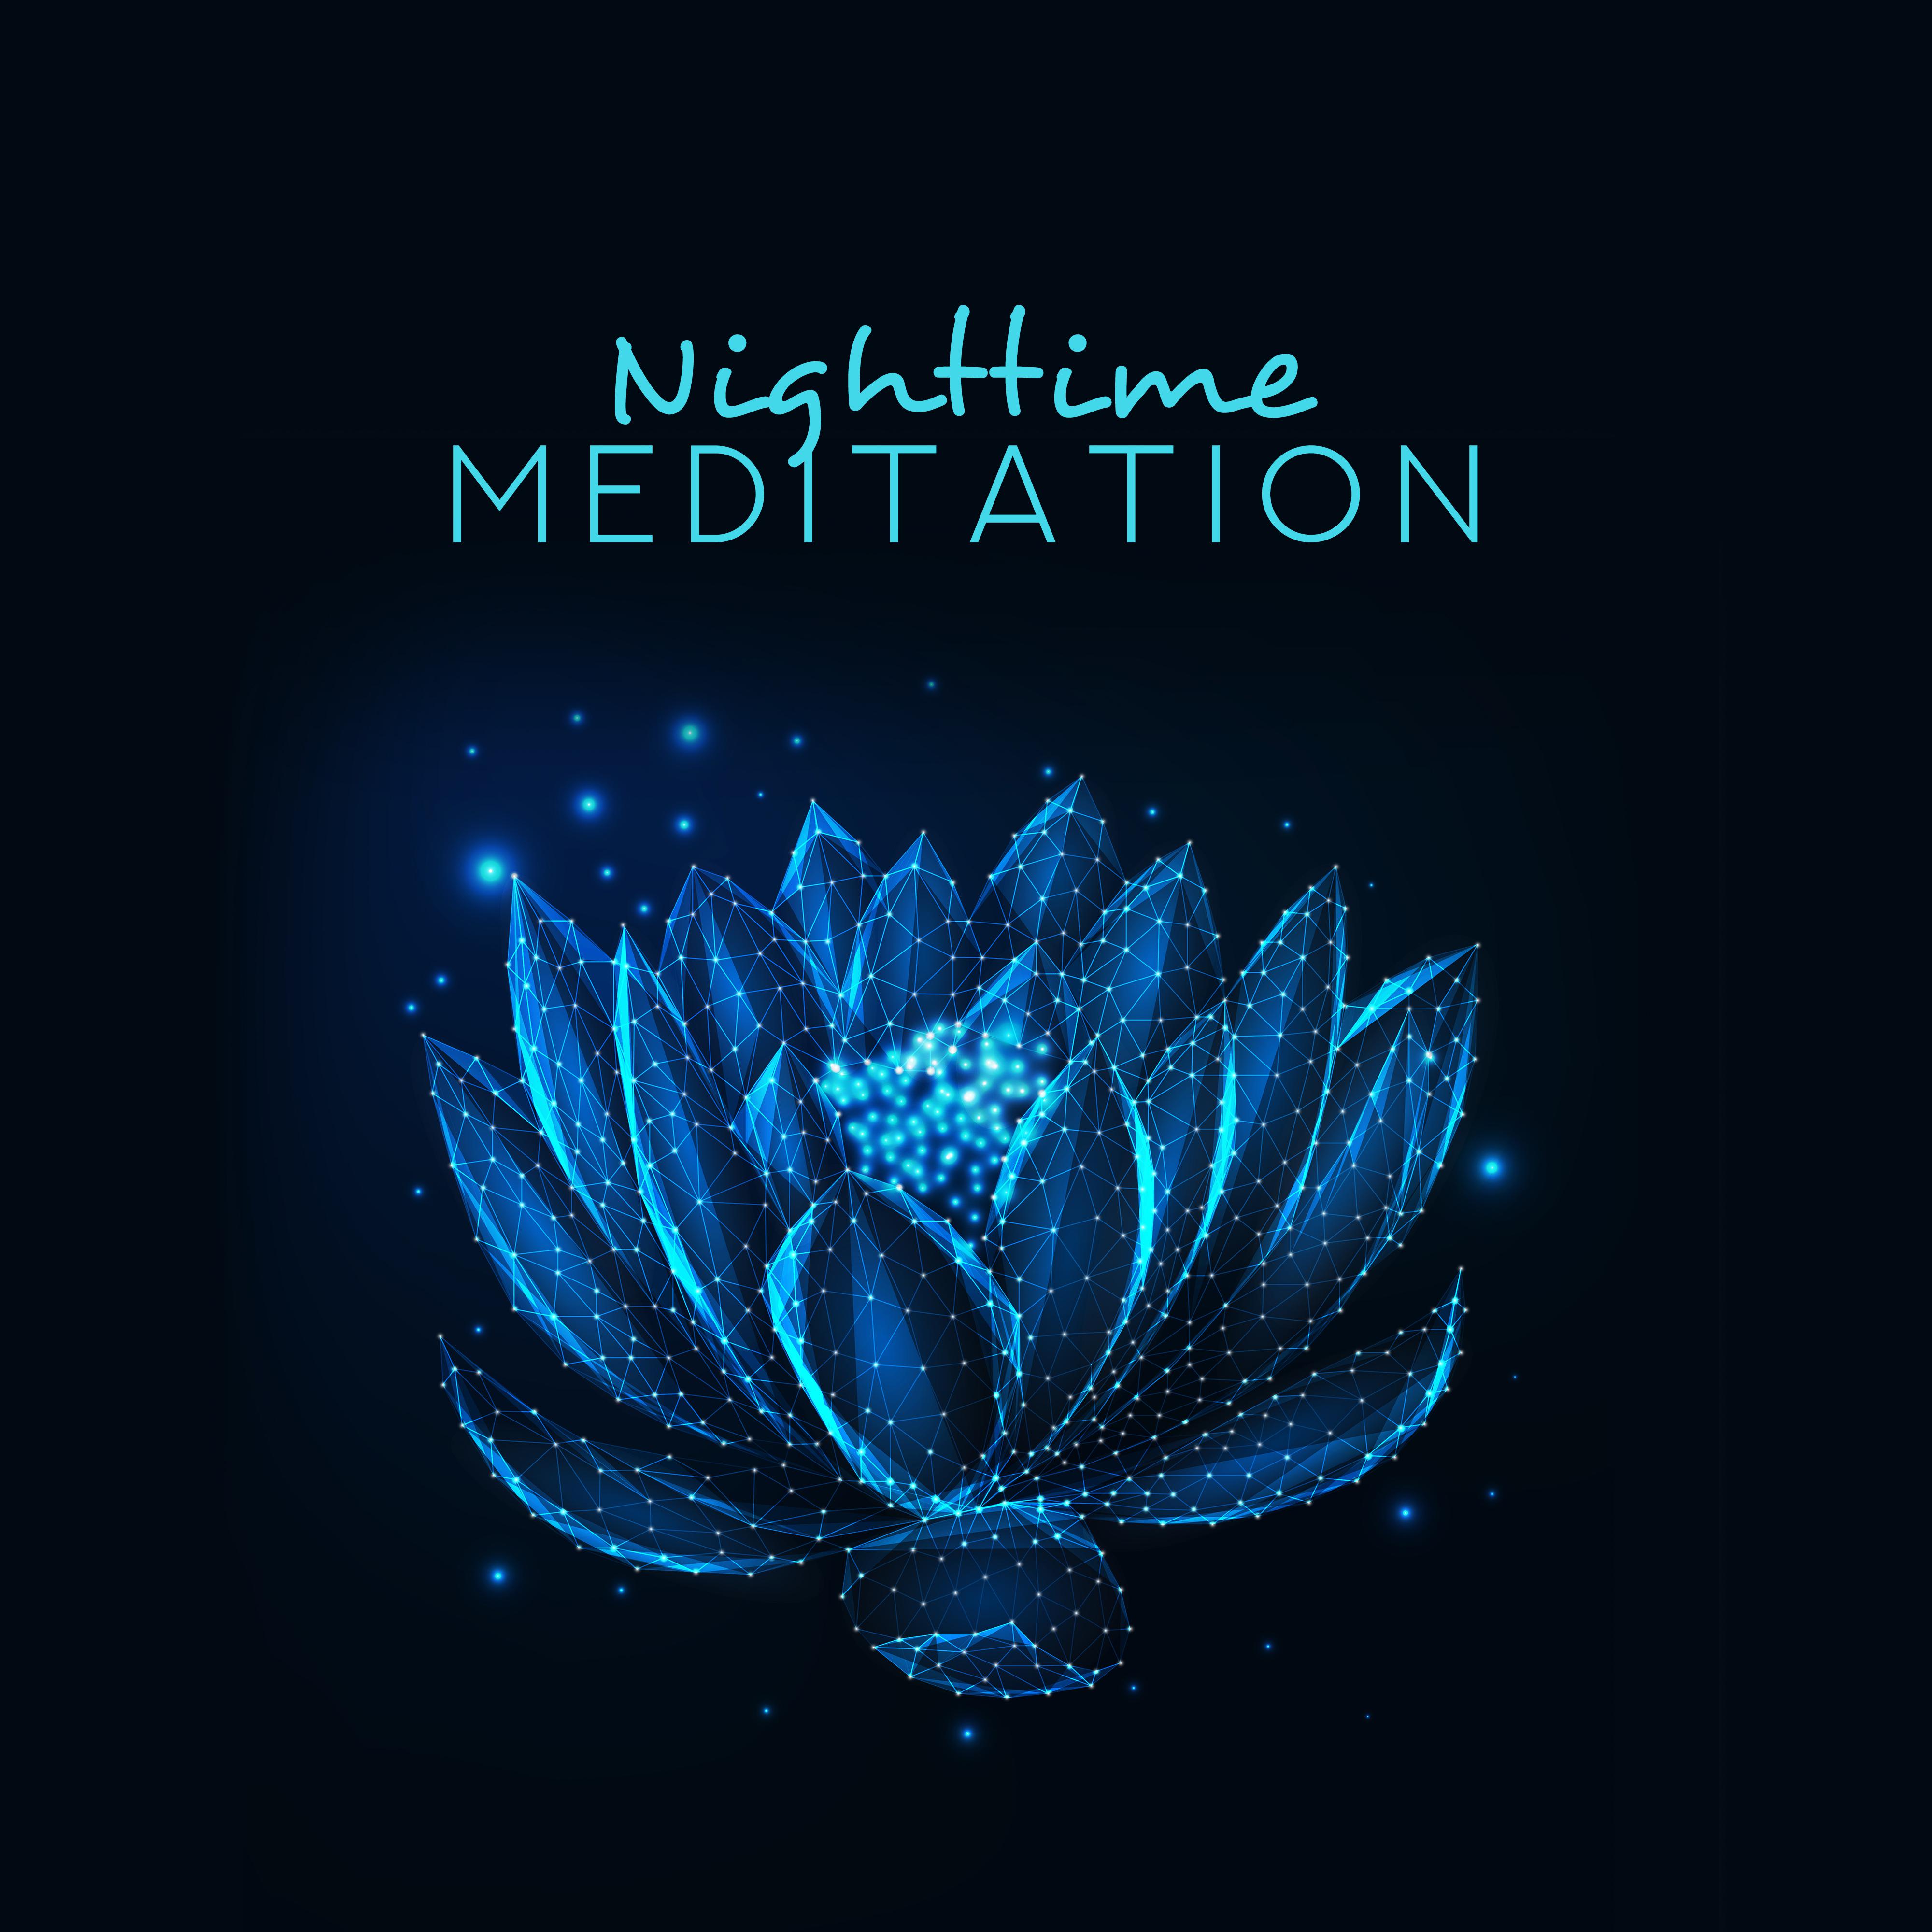 Nighttime Meditation: Meditation at Bedtime, Help in Fighting Fatigue and Insomnia, Relieving Stress, Quieting and Focusing the Mind, Meditating Concentration, Mindfulness or Guided